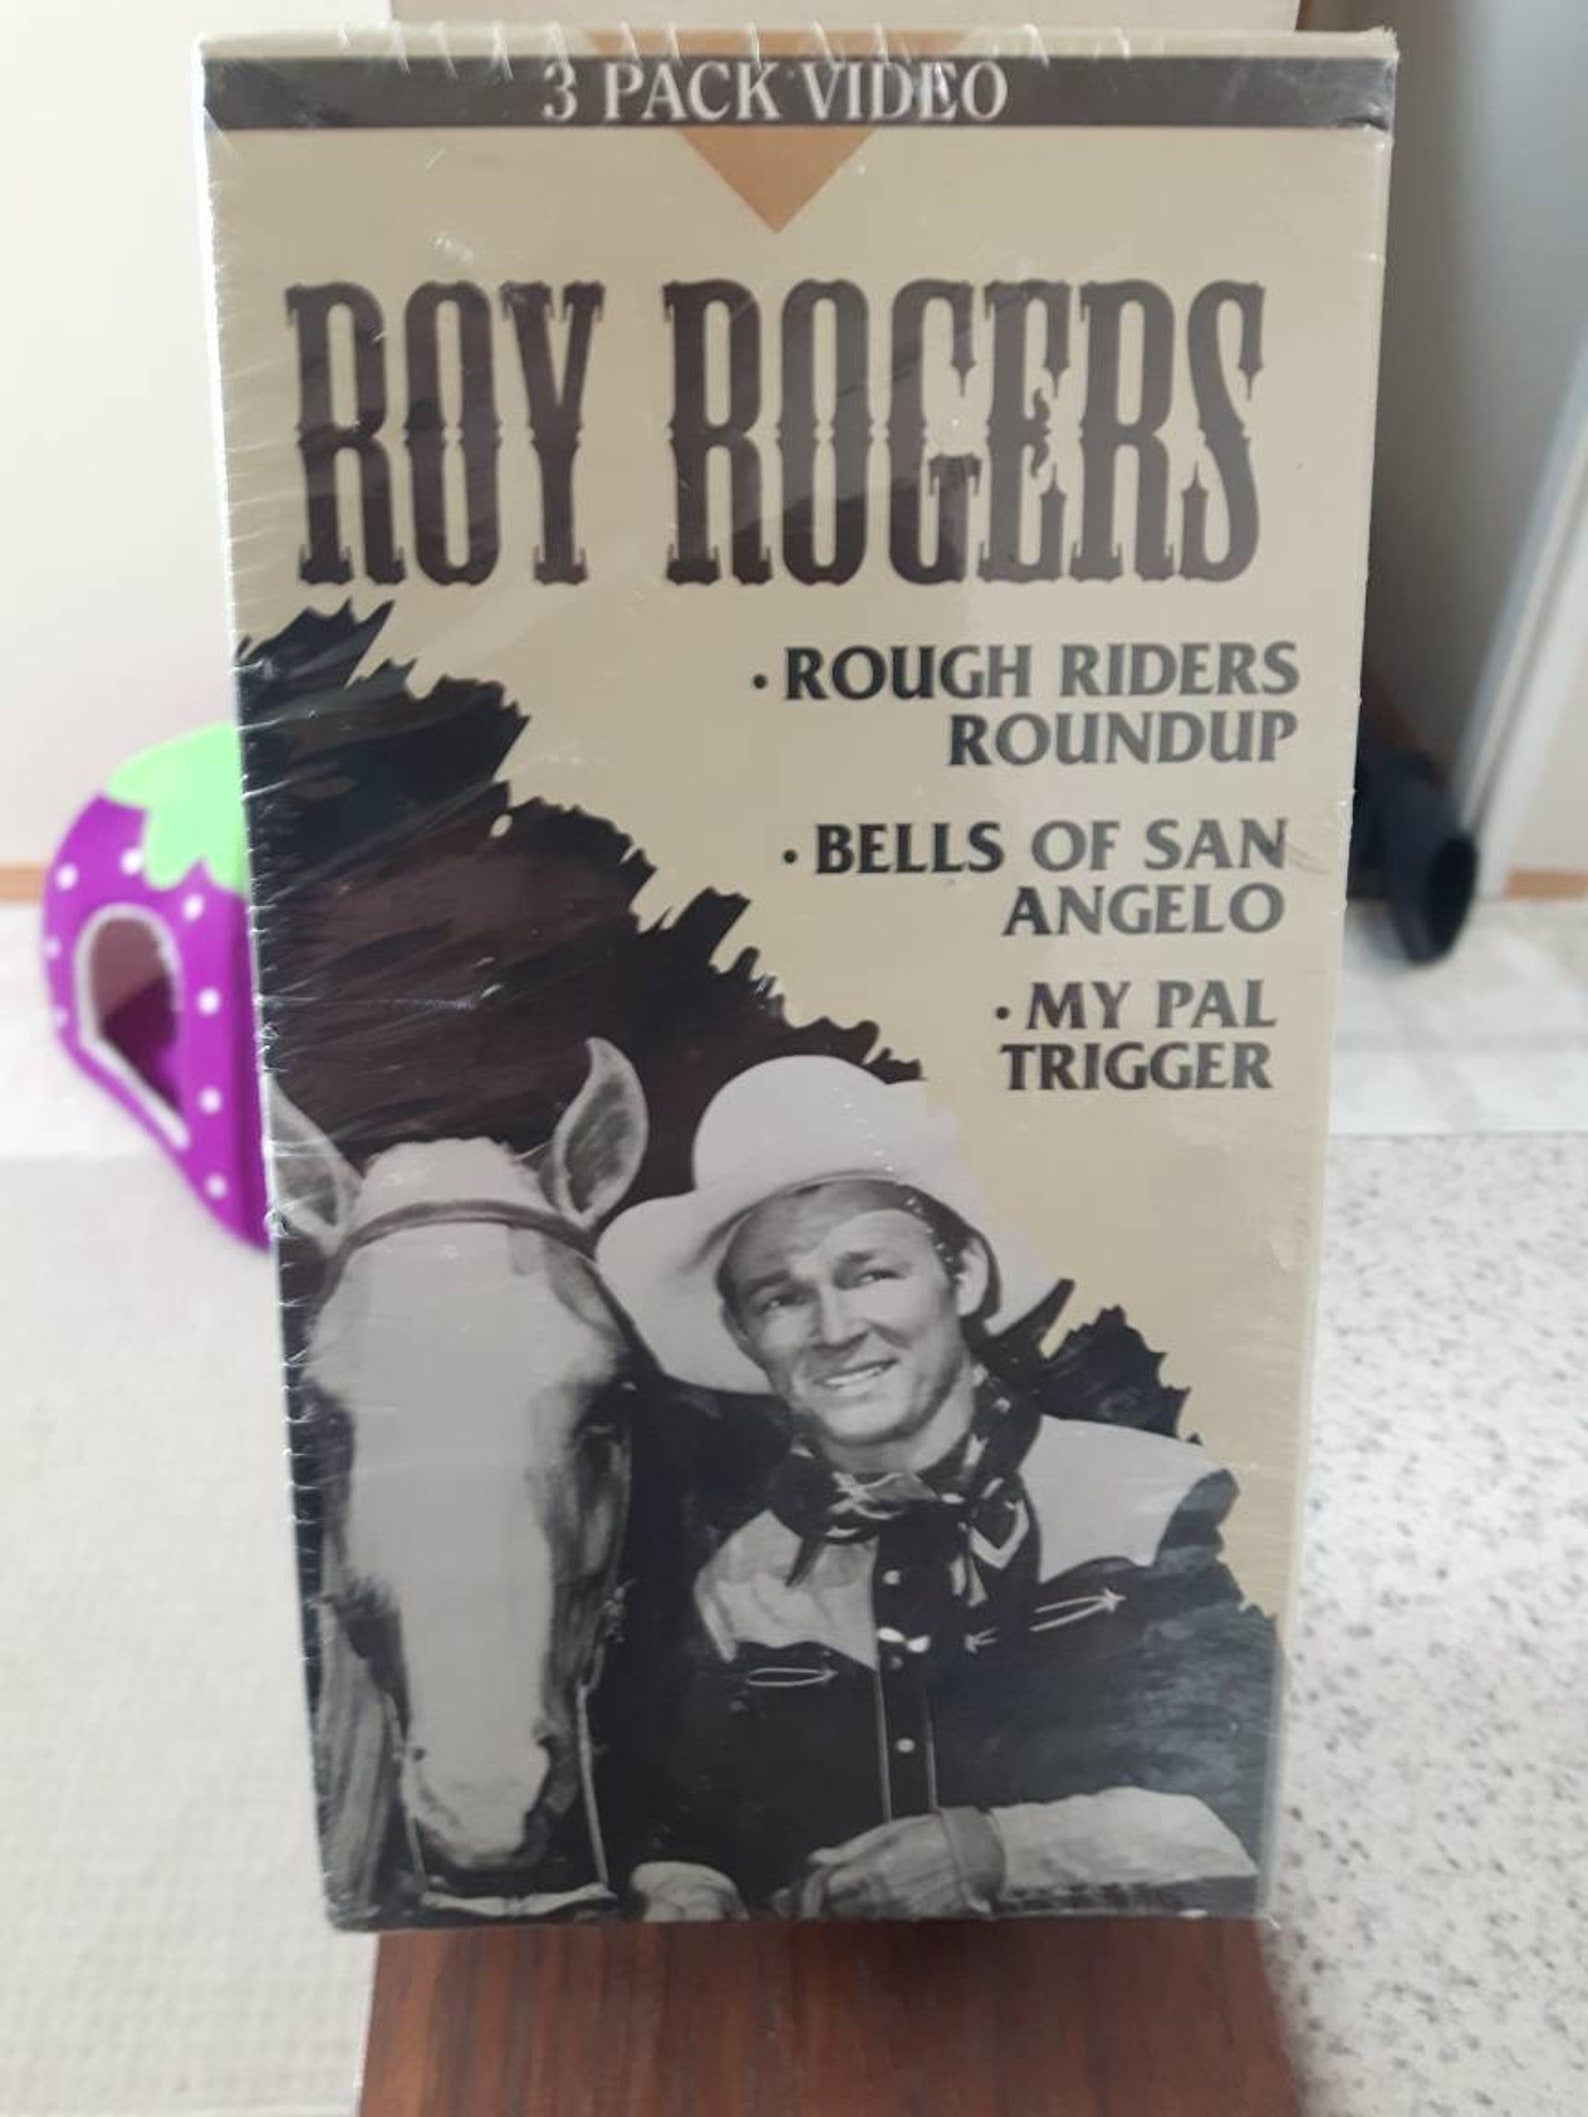 Roy Rogers movies. 3 pack video. Vintage VHS box set. Brand | Etsy